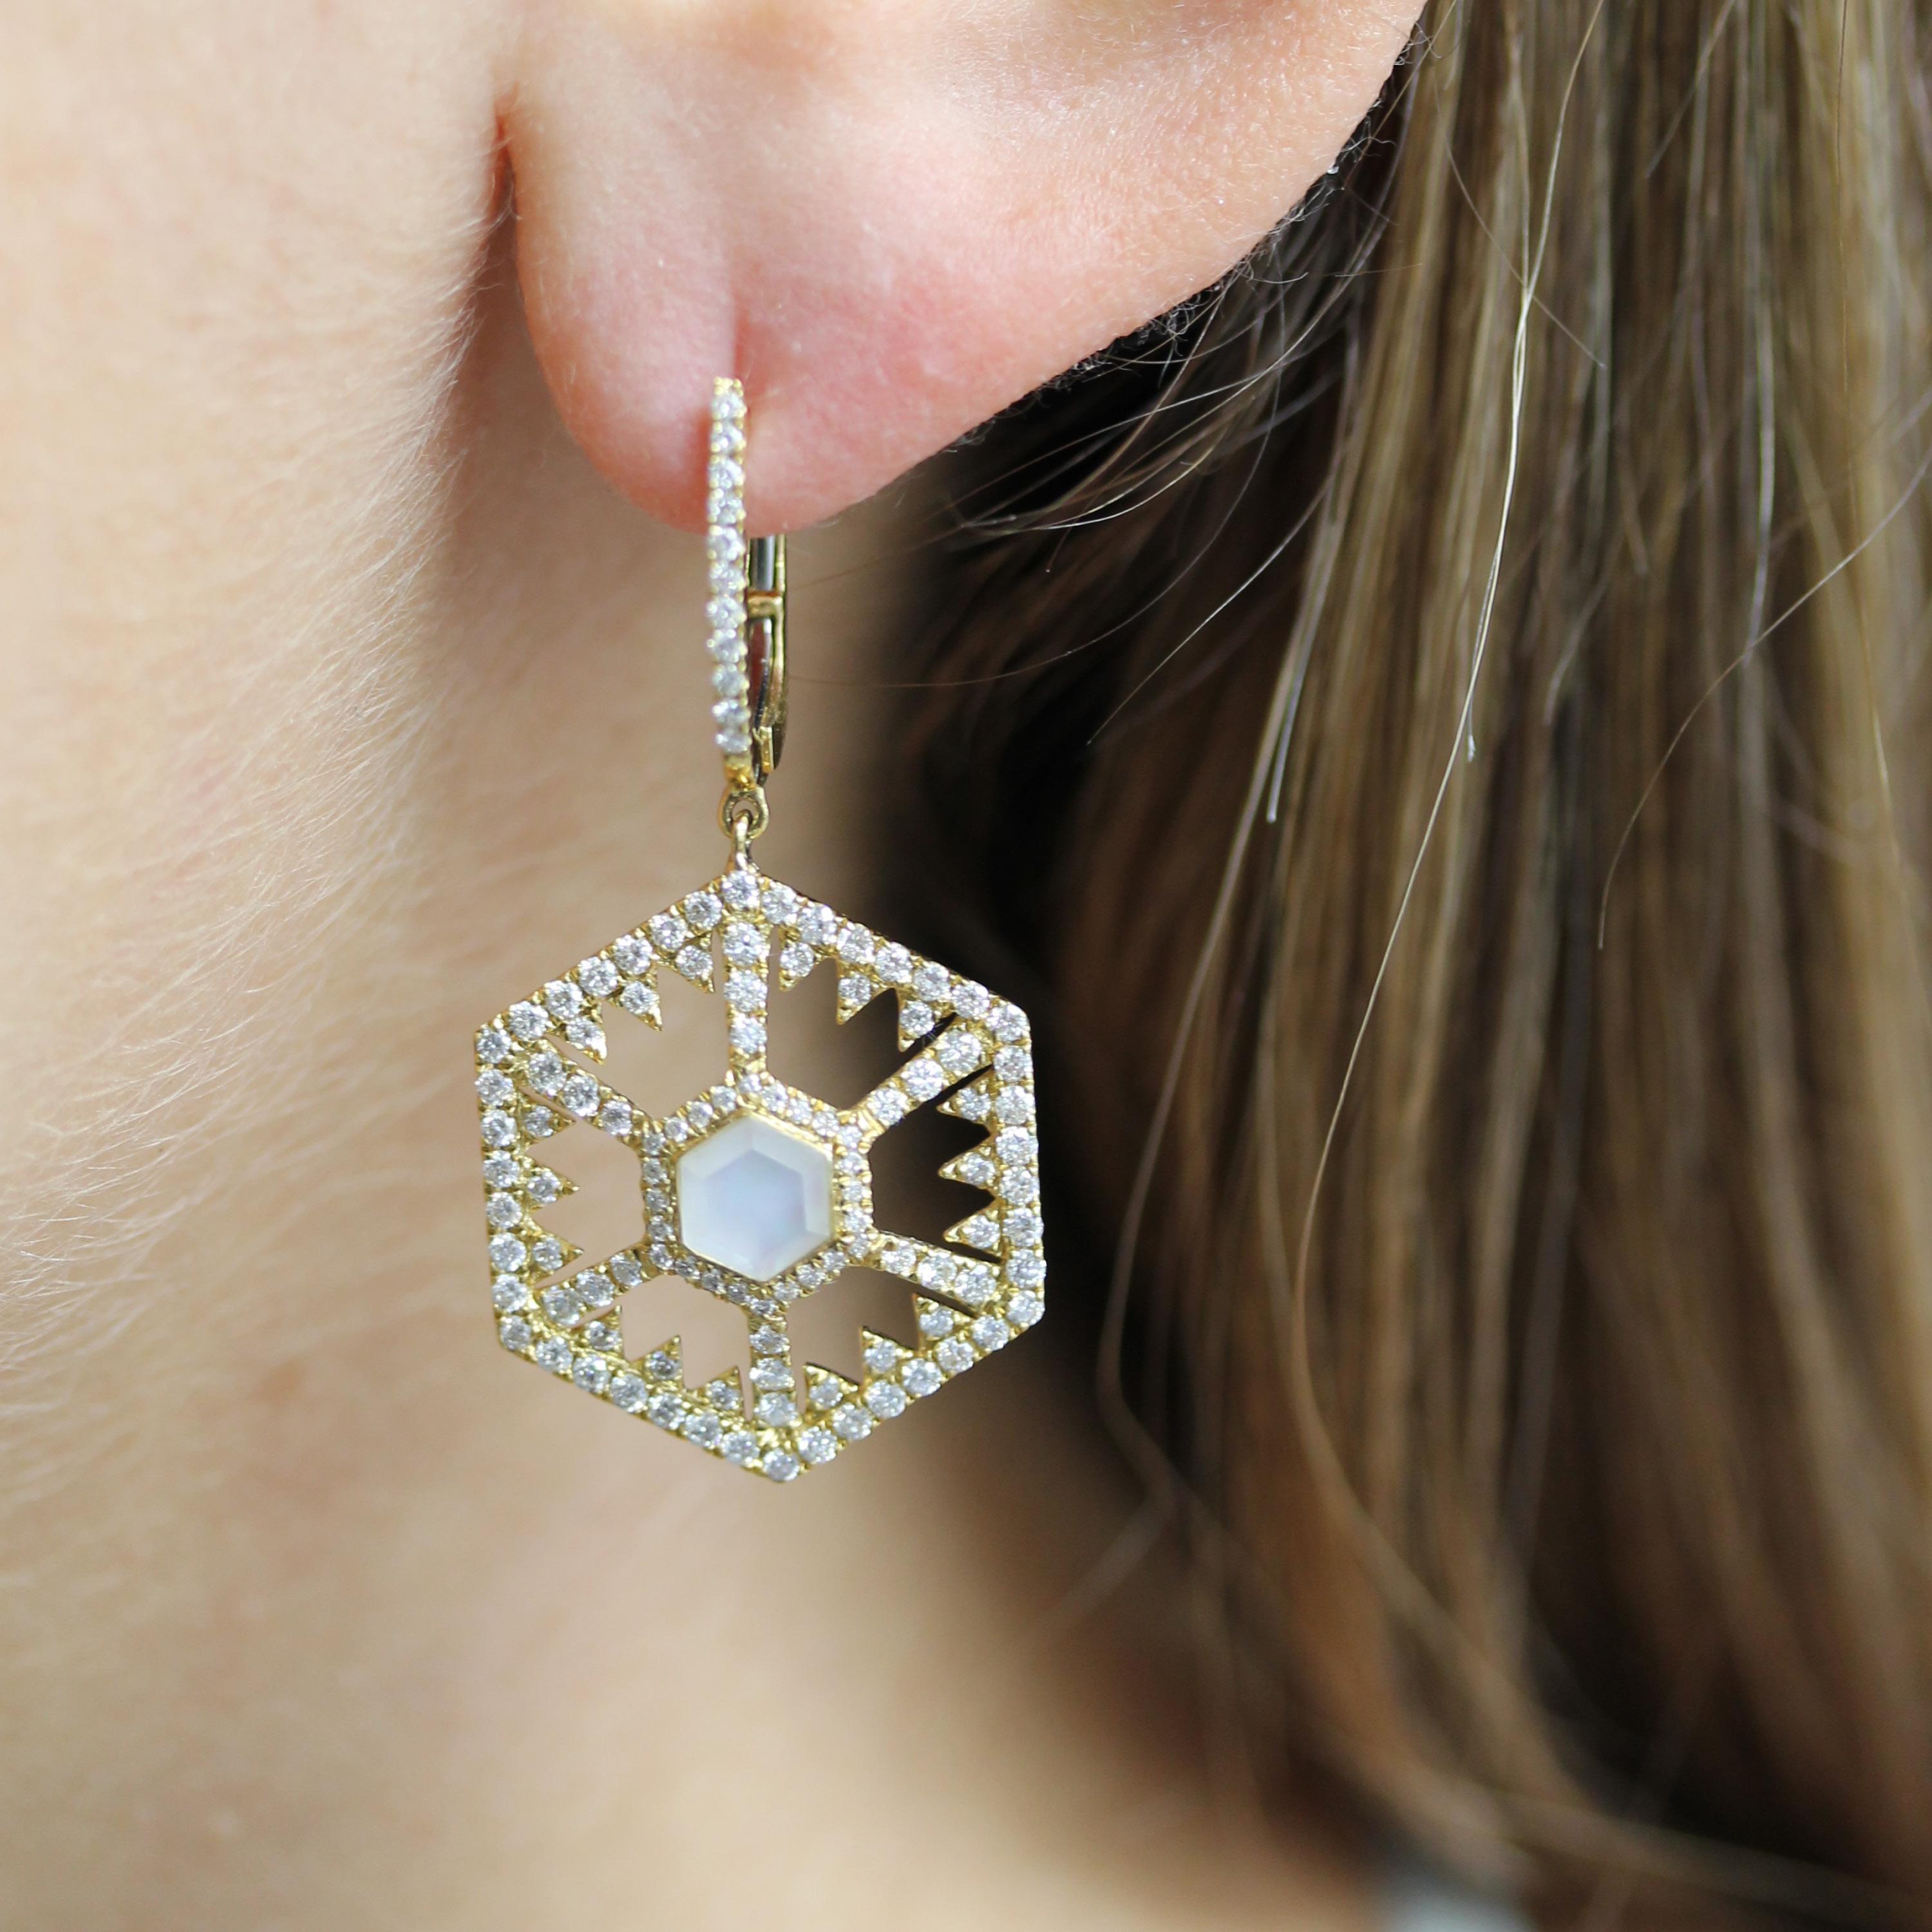 *PLEASE ALLOW 4-6 WEEKS FOR DELIVERY*

White Orchid Collection Hexagonal Earrings, with White Mother of Pearl and White Quartz Doublets, and gold diamond huggie-tops, in 18K yellow gold. 224 diamonds make these earrings shine in any season. White